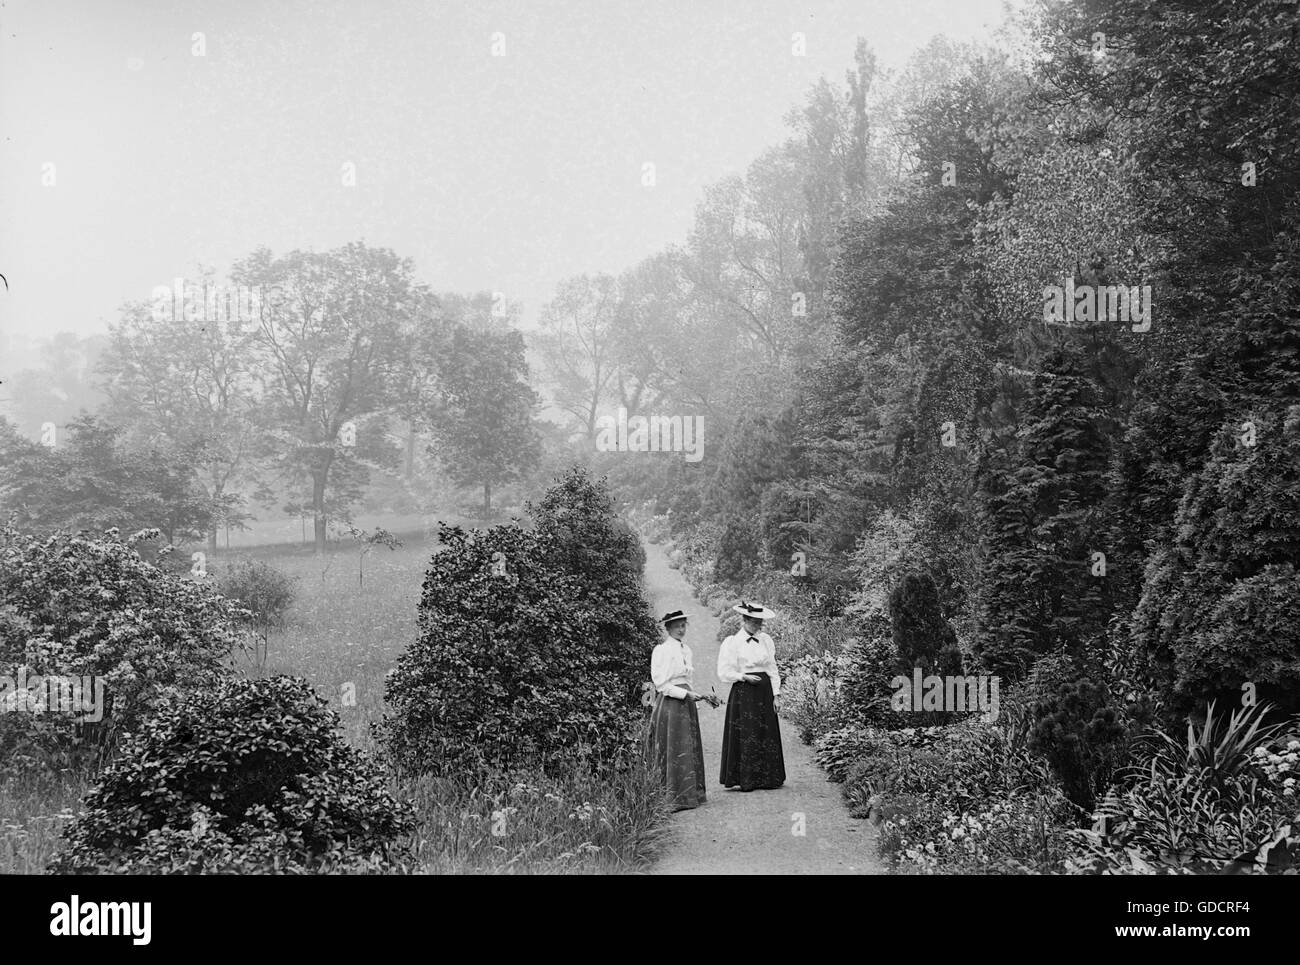 Victorian women in park gardens c1900 Photograph by Tony Henshaw      From original glass negative Stock Photo